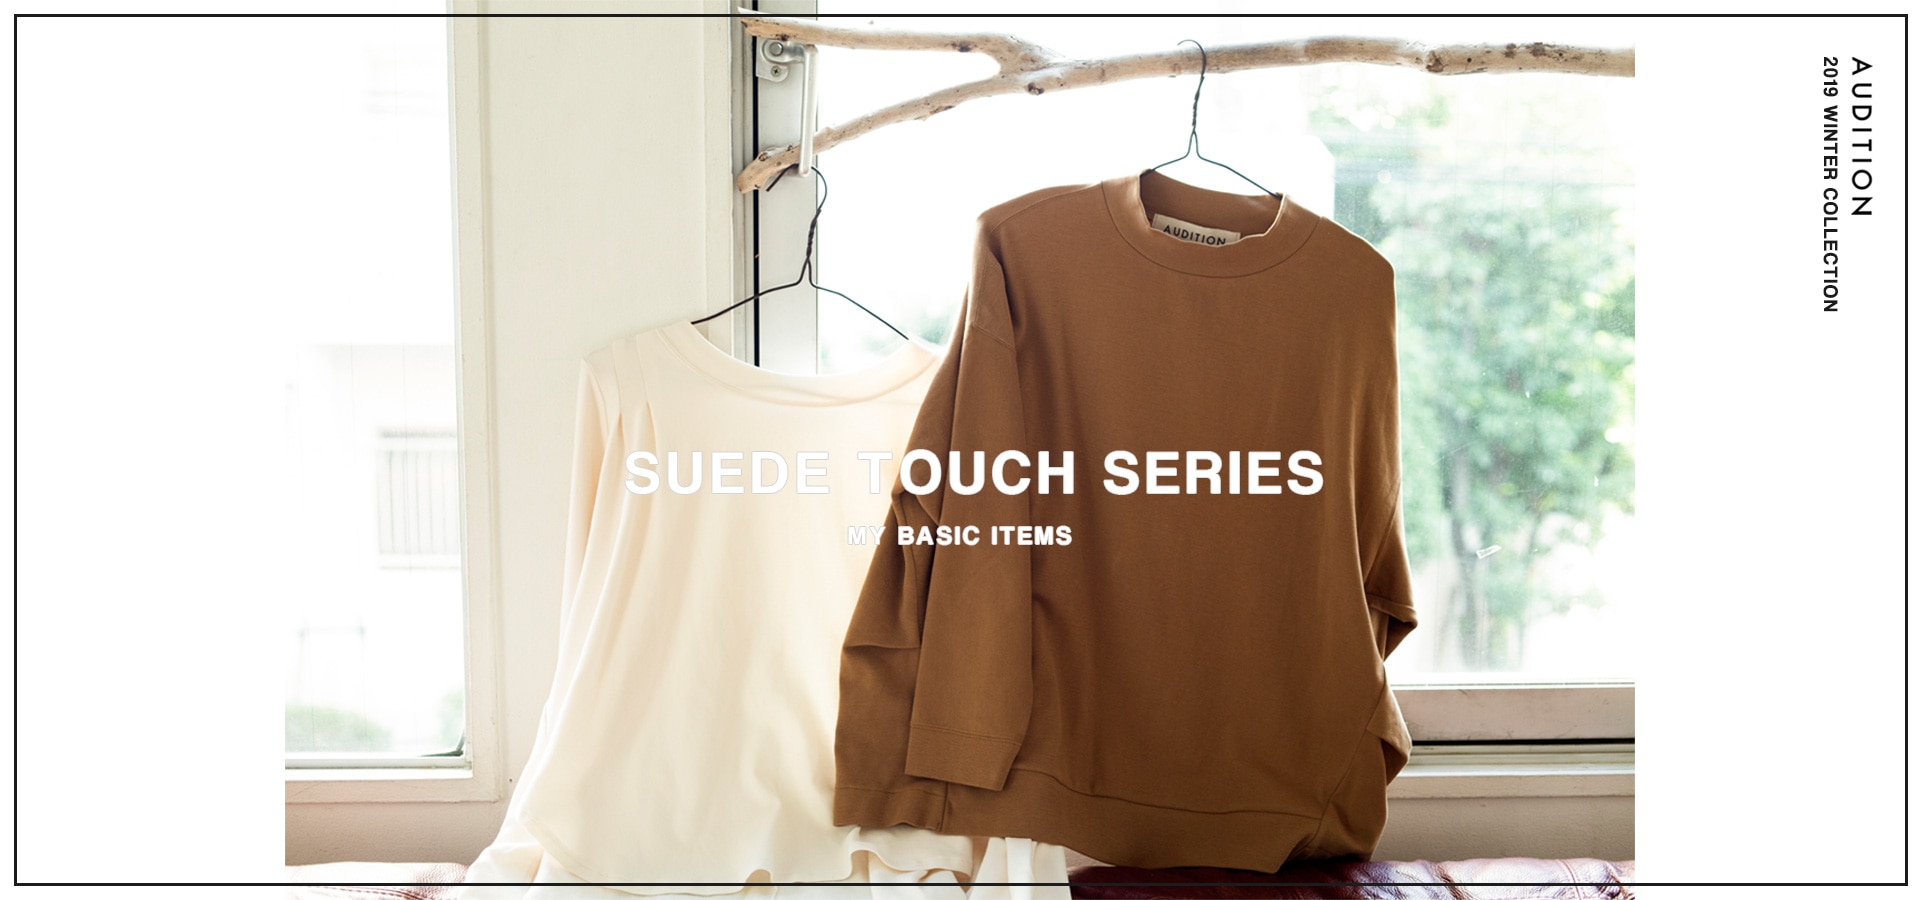 MY BASIC vol.2 - Suede touch series